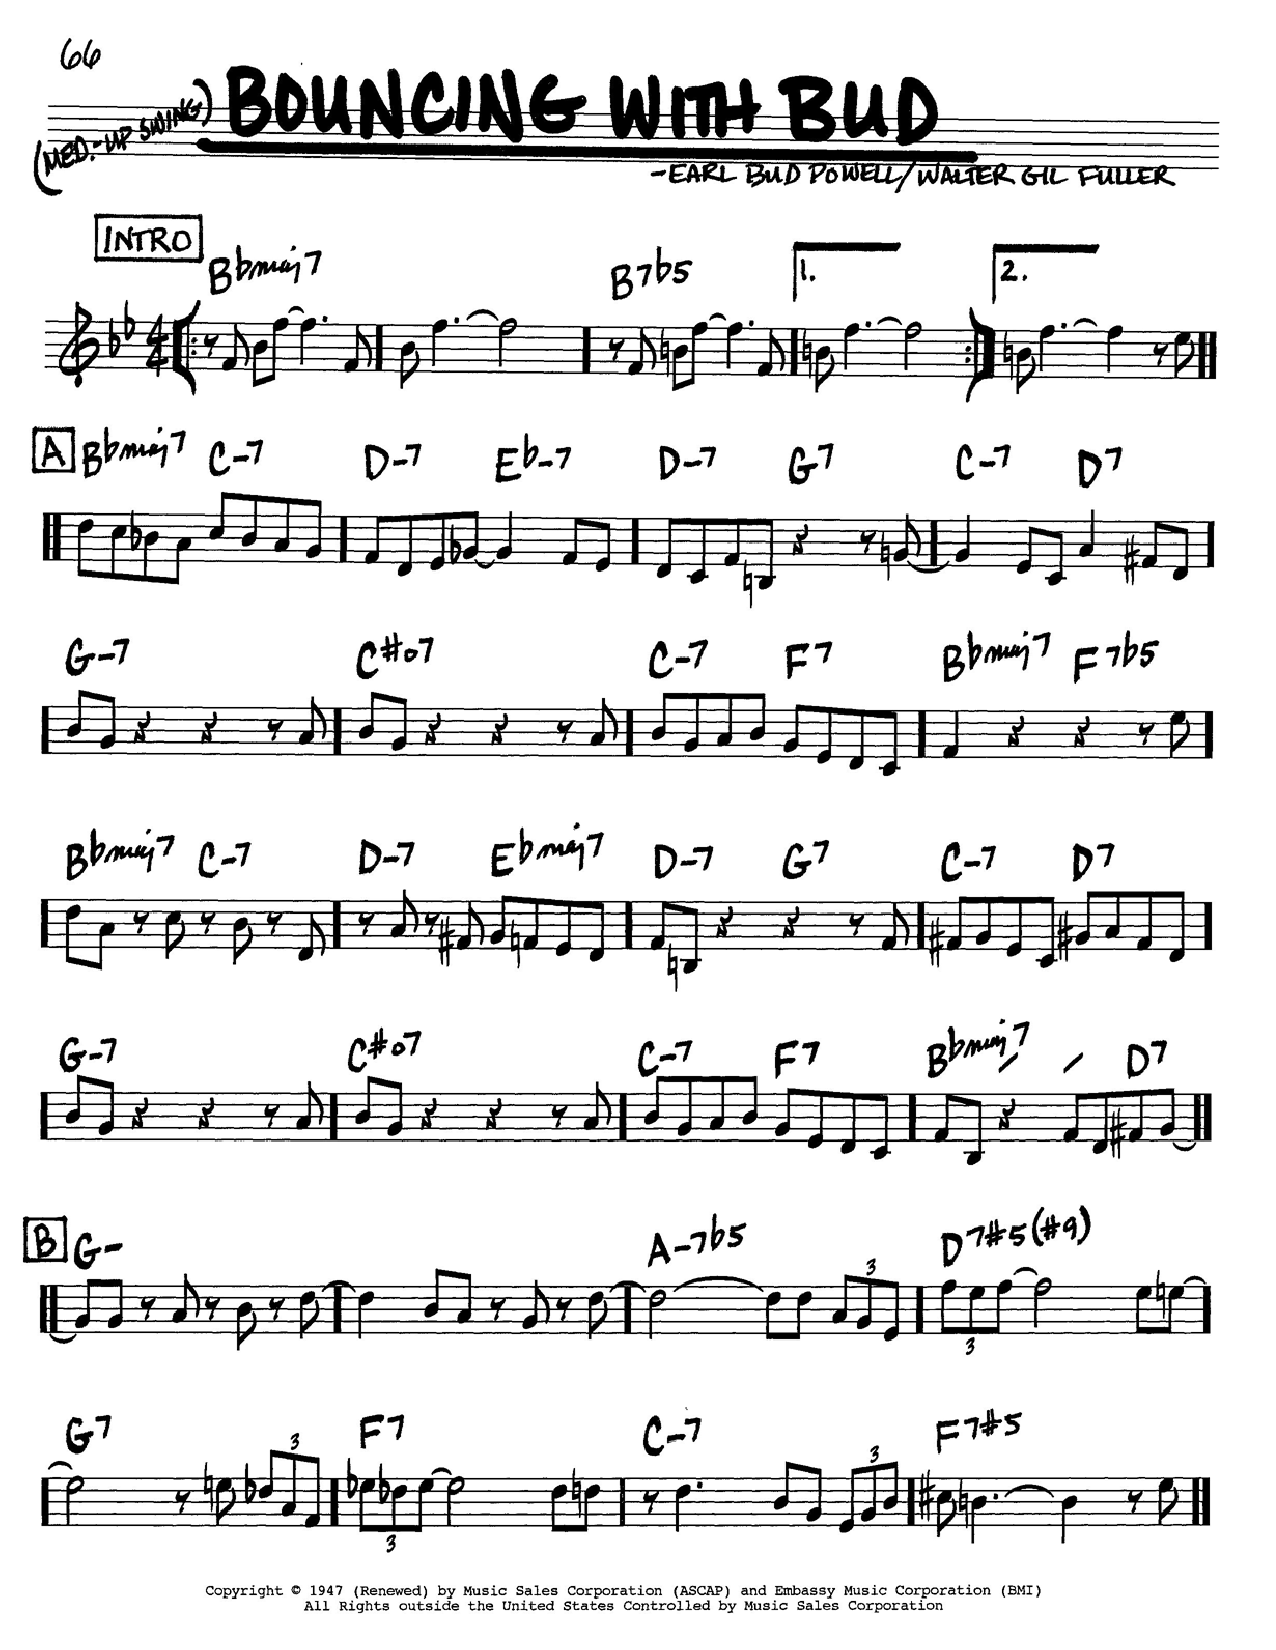 Bouncing With Bud sheet music